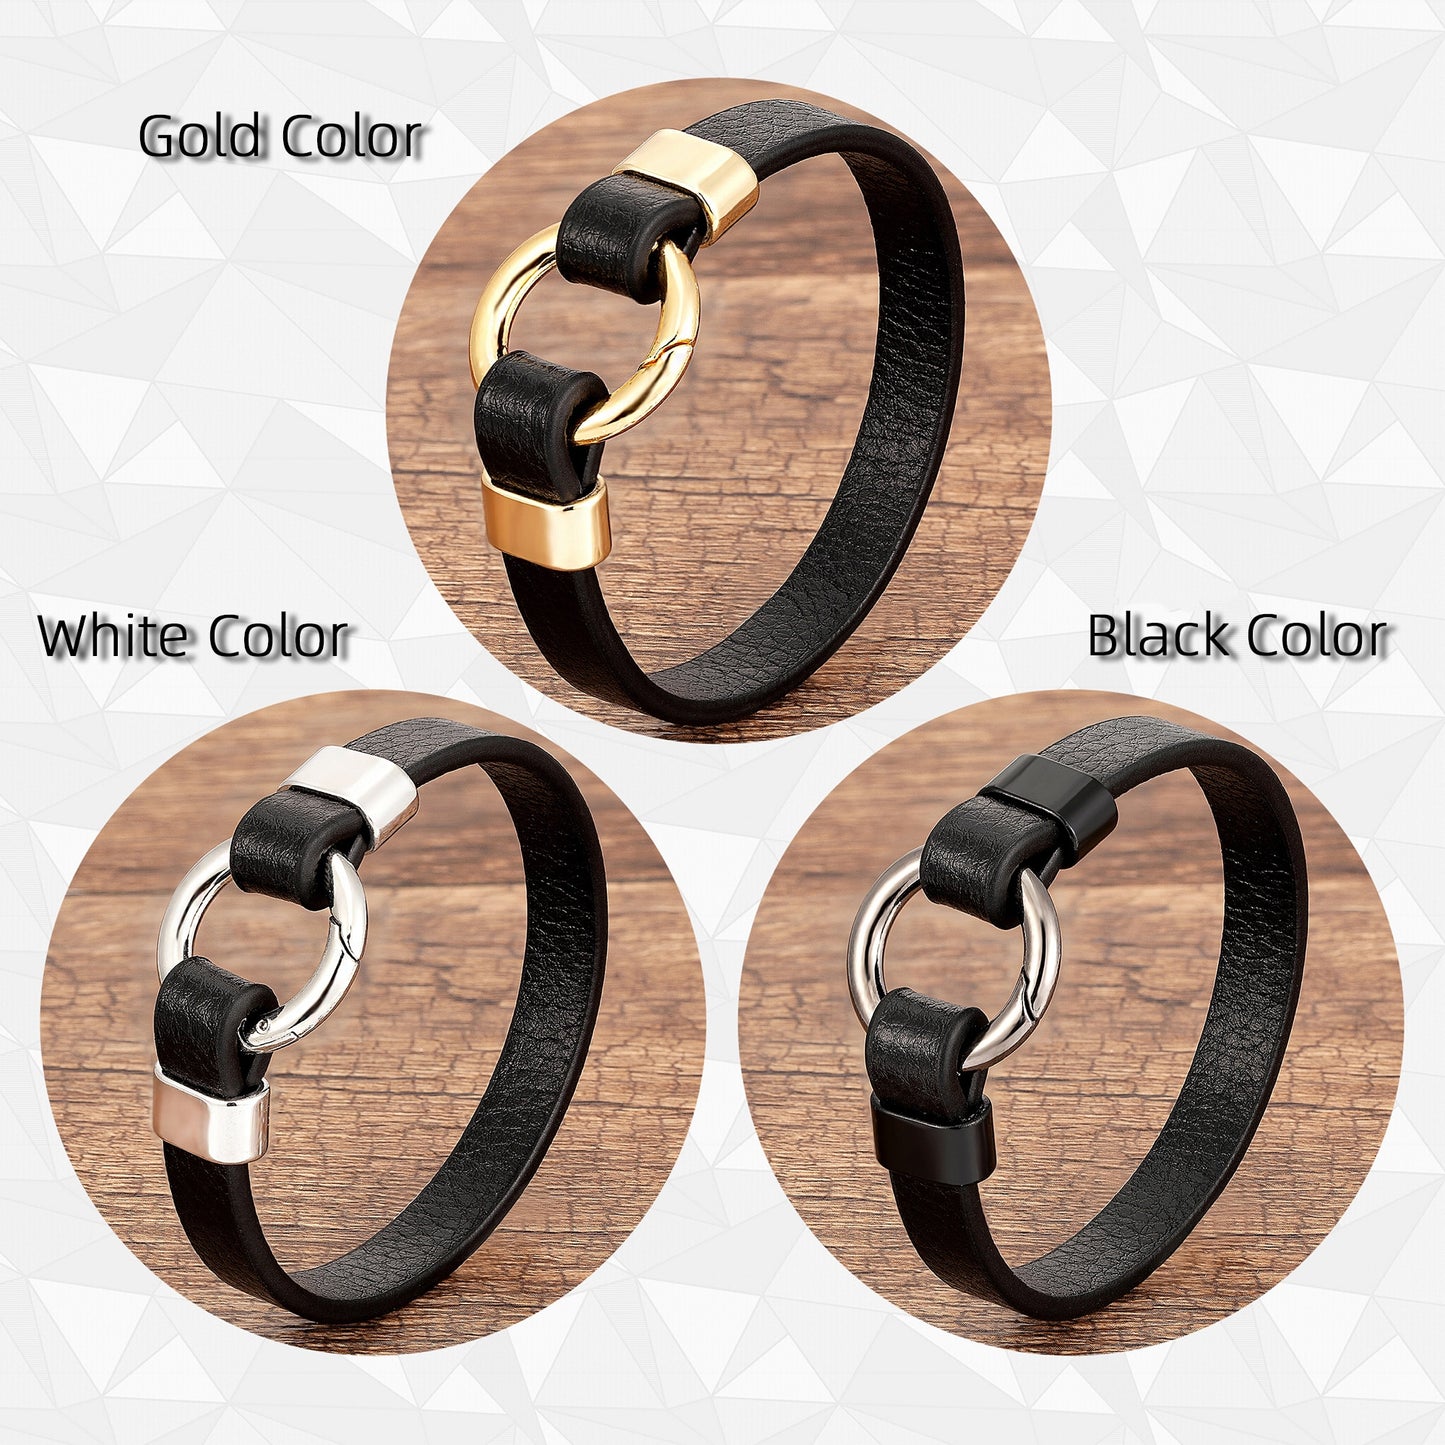 Leather Men's Gold Color with Metal Bracelet For Women Male